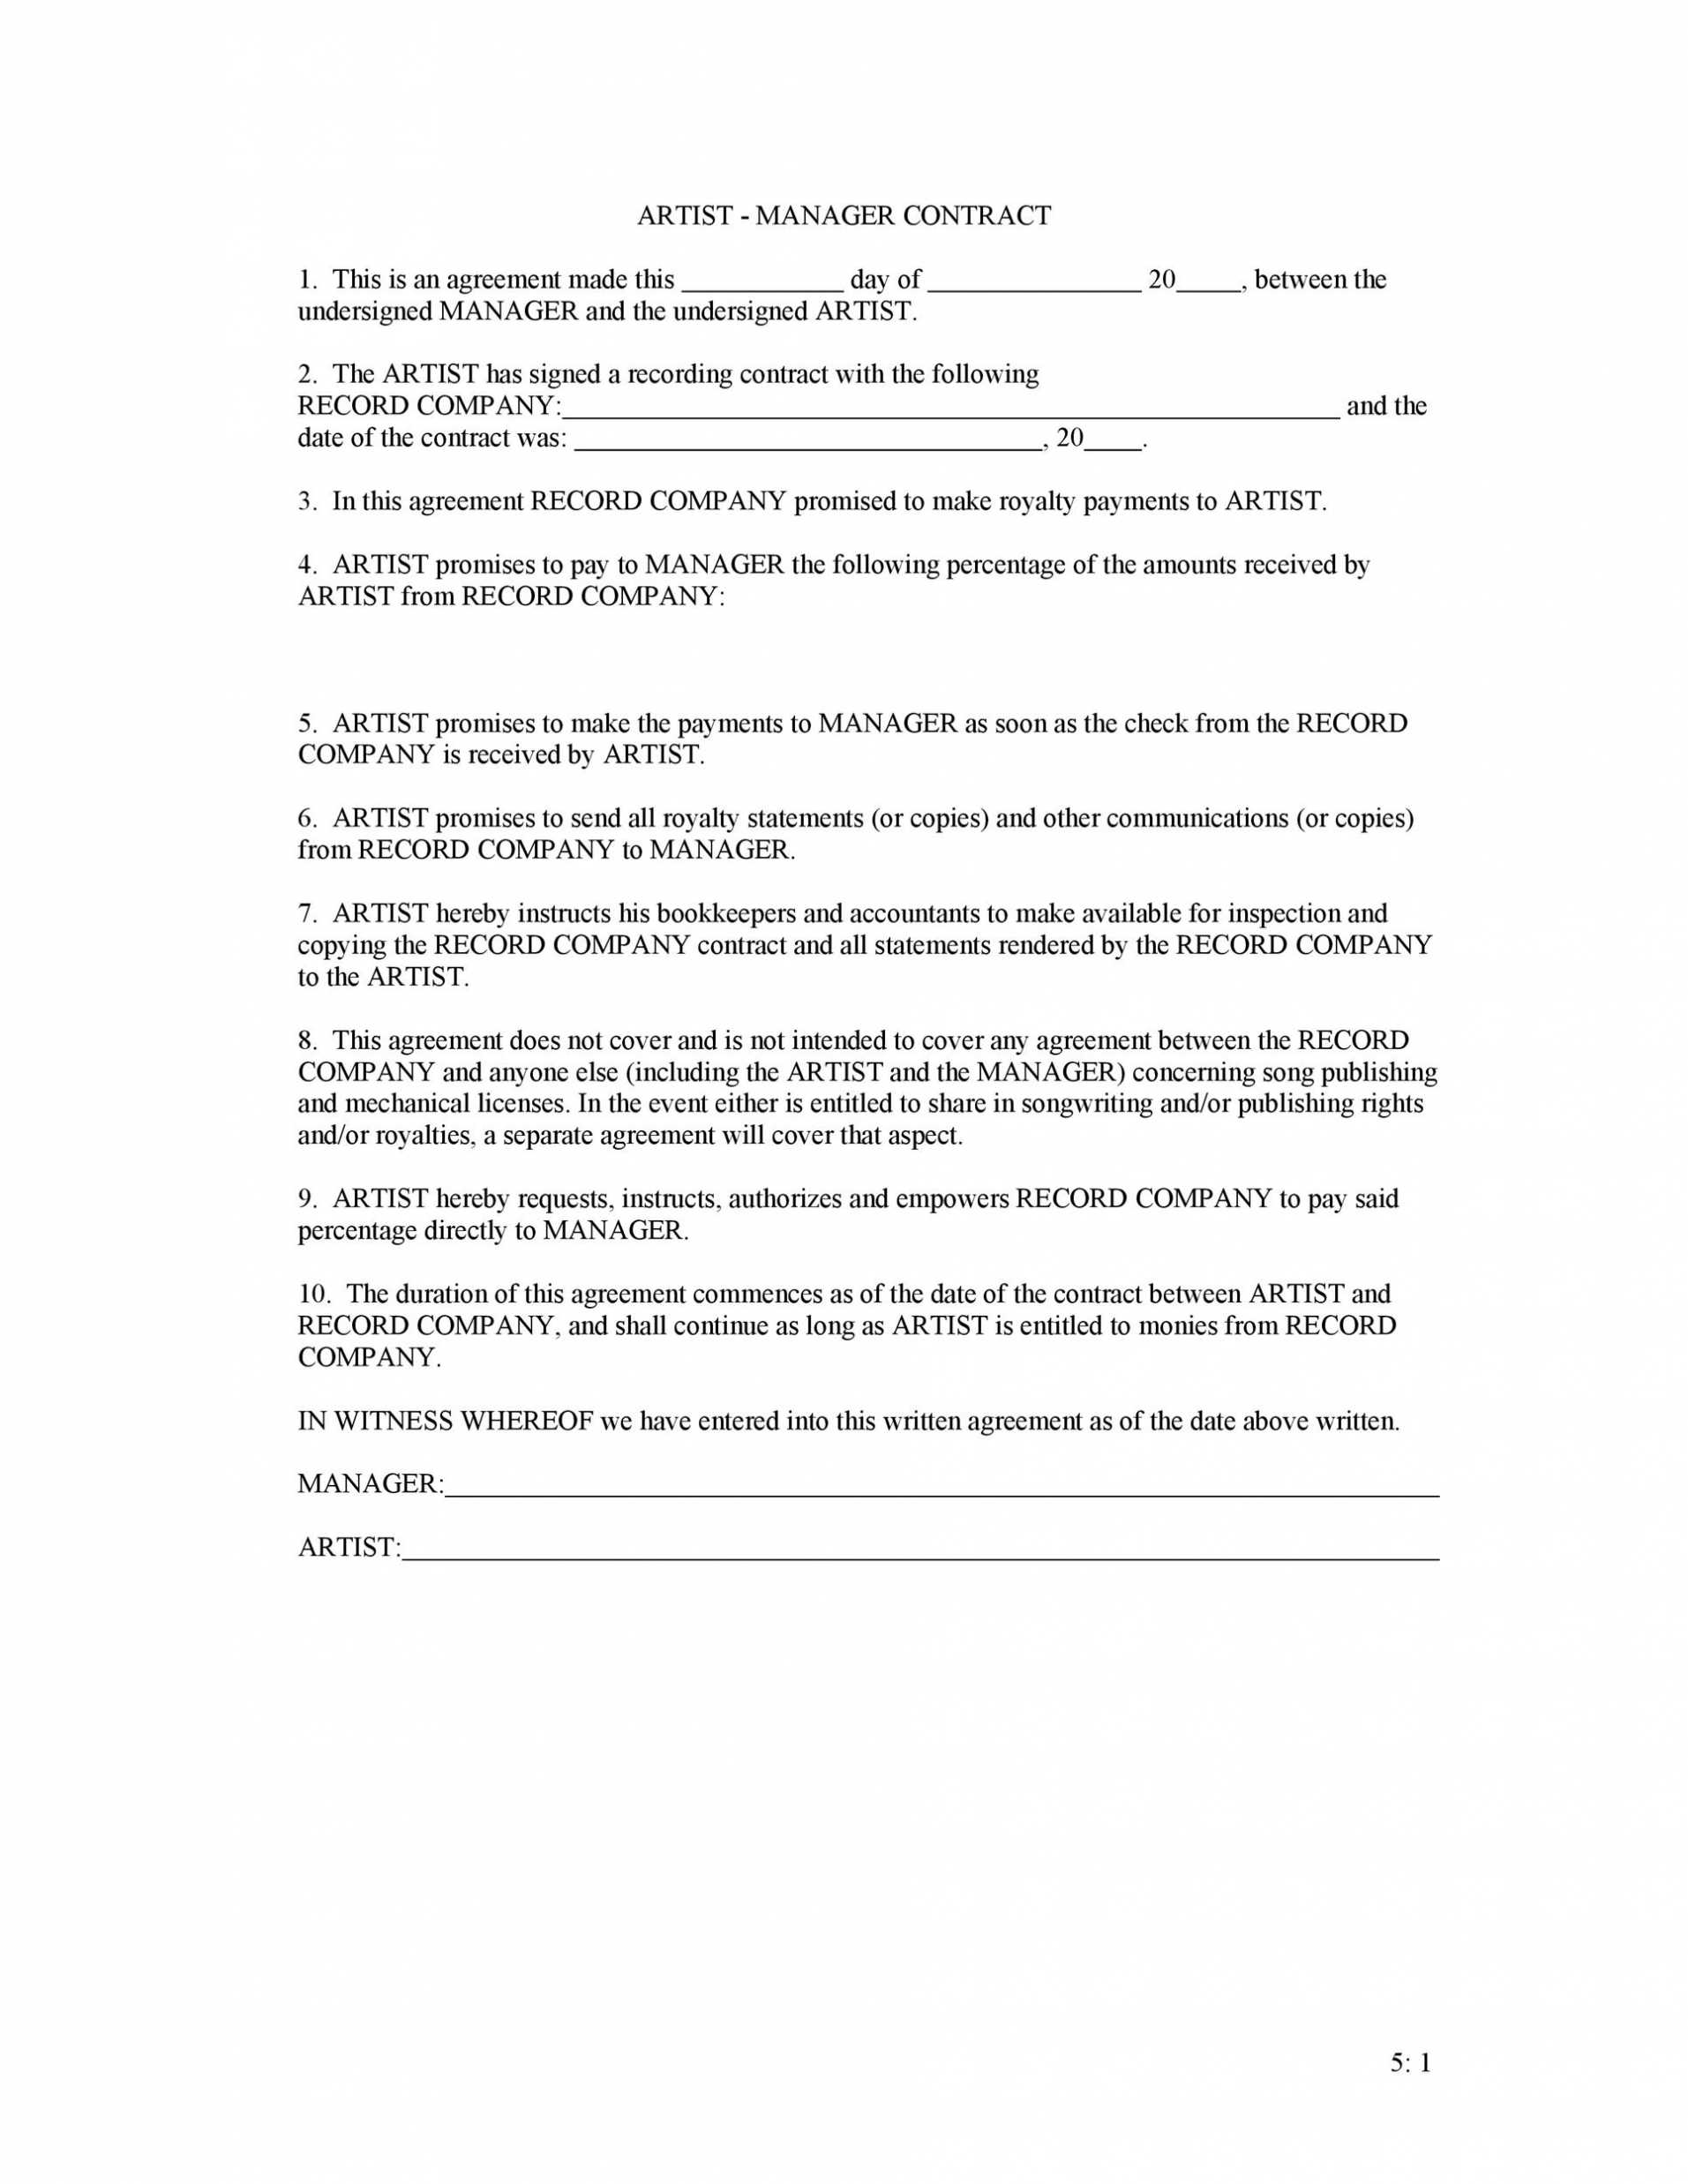 50 Artist Management Contract Templates (Ms Word) ᐅ Templatelab inside Business Management Contract Template